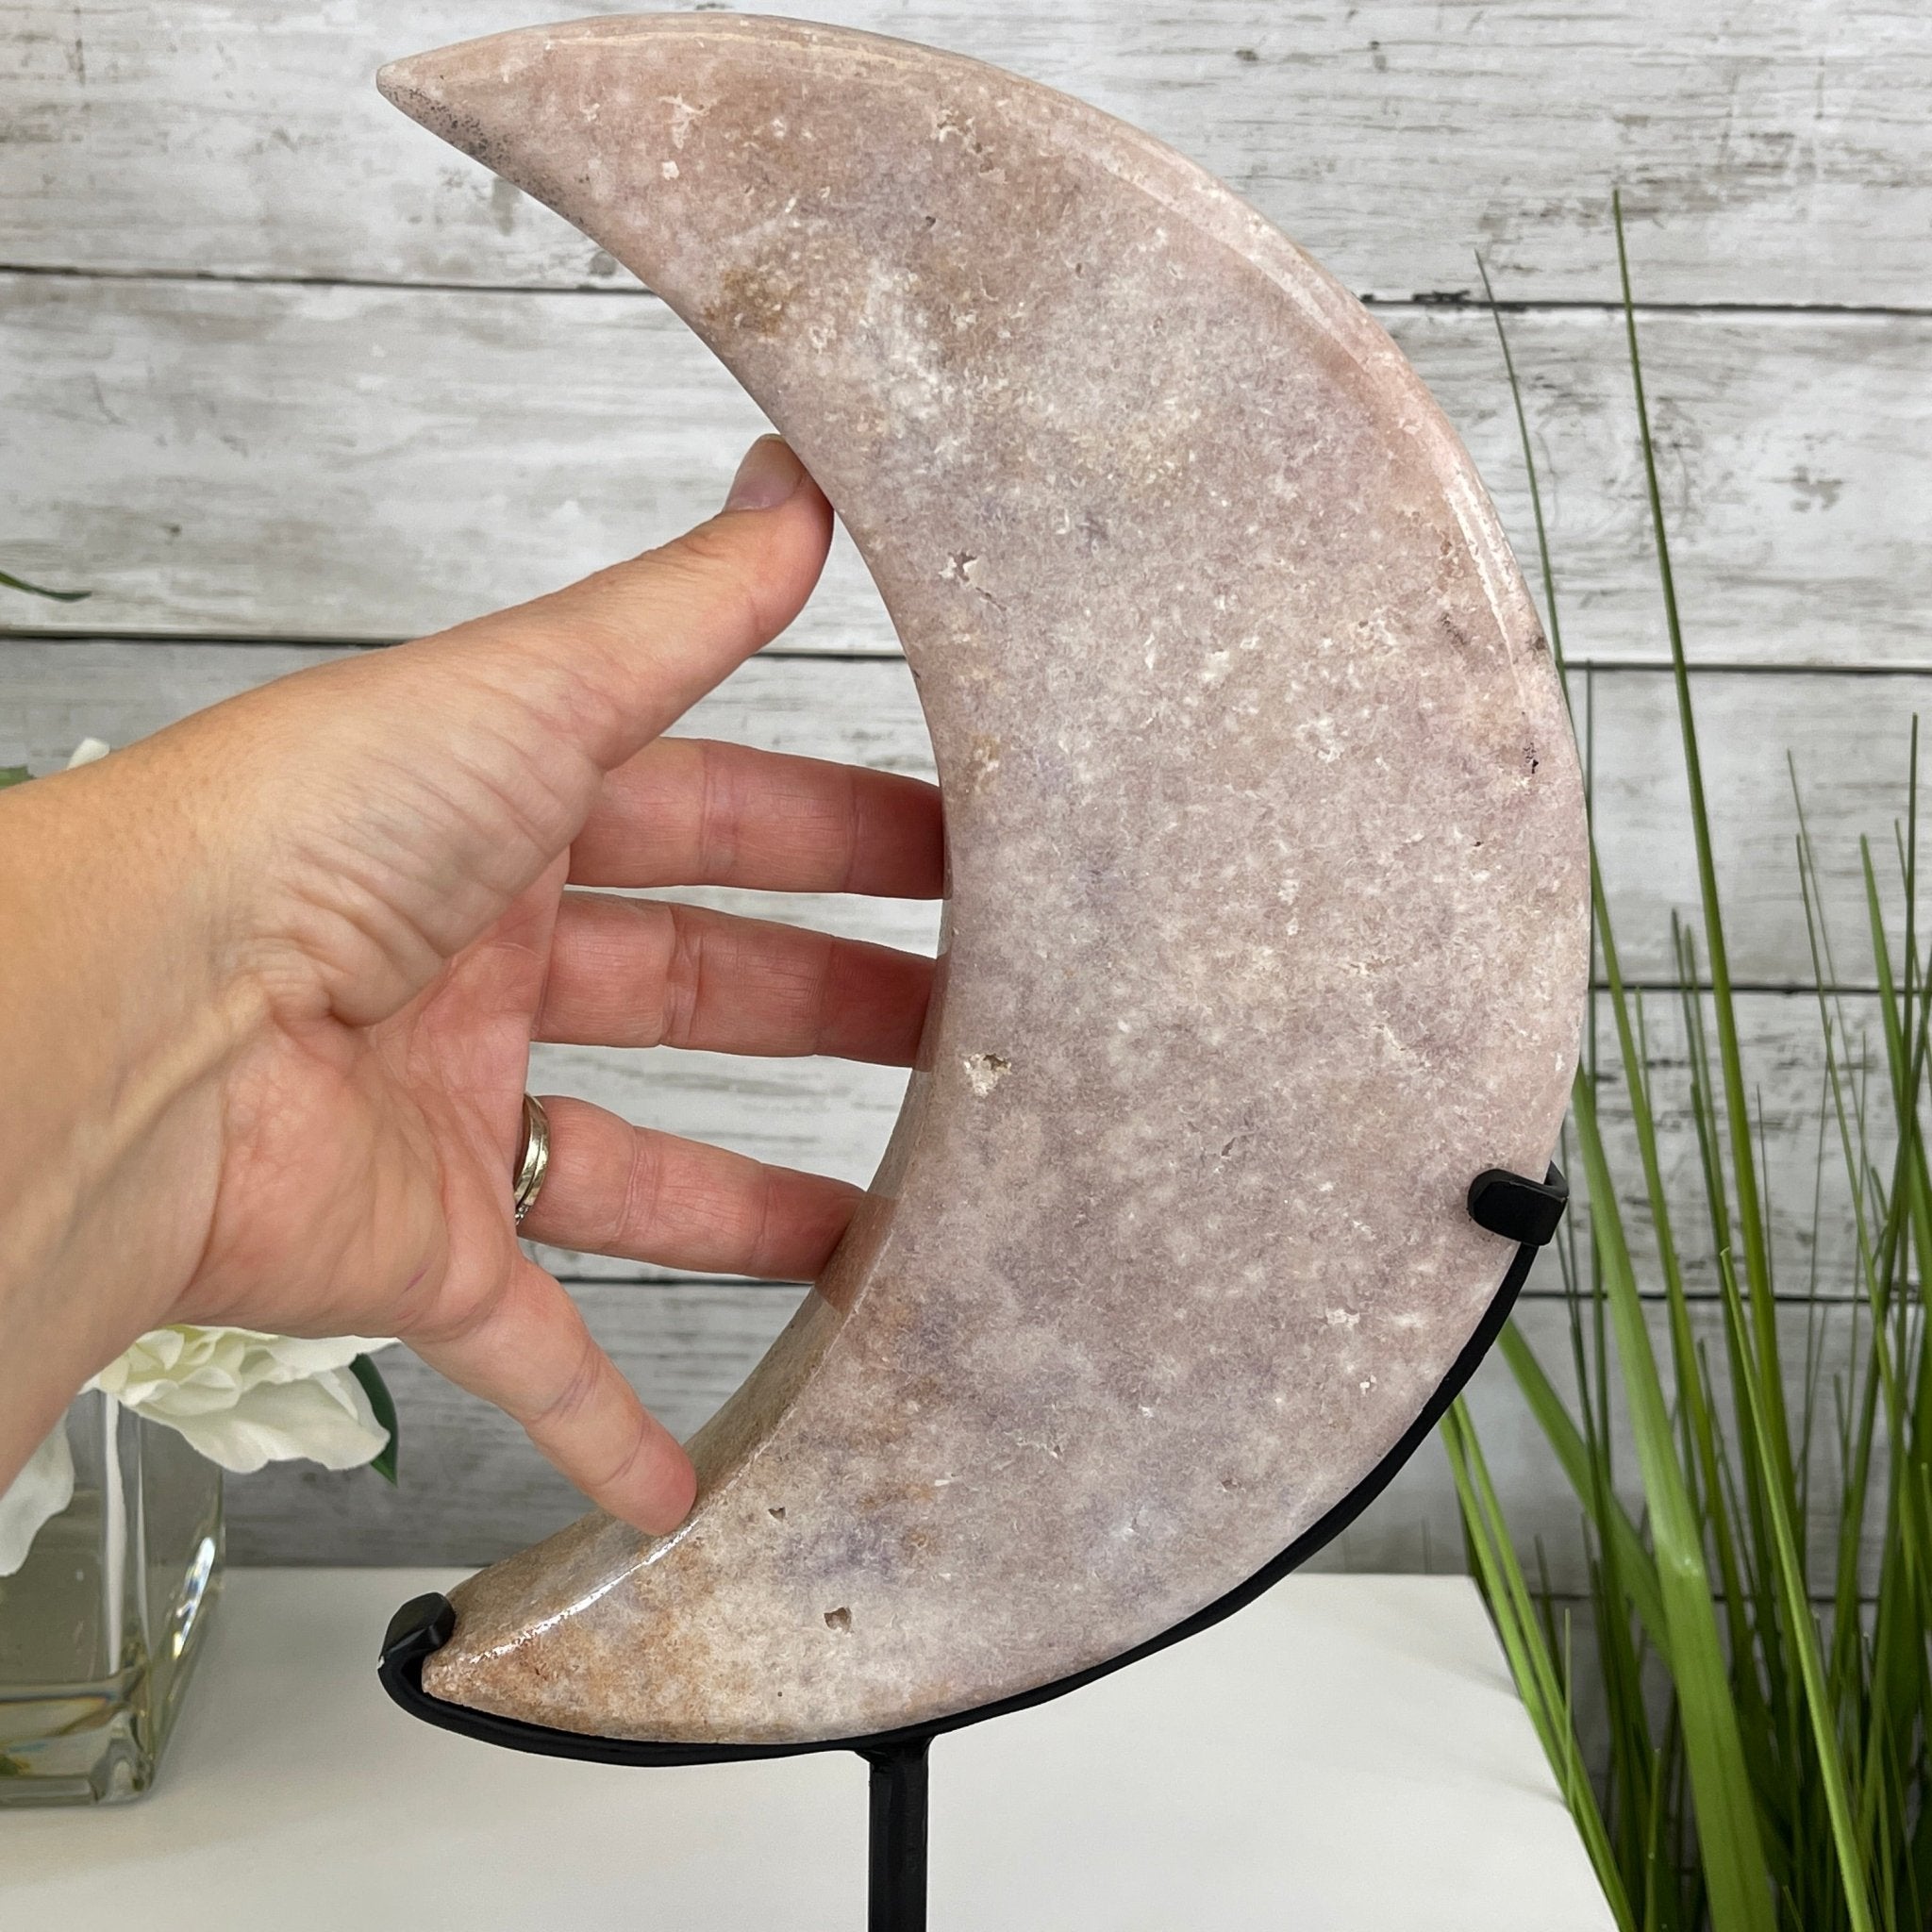 Pink Amethyst Crescent Moon Polished Geode, 4.8 lbs and 13.3" Tall #5740-0025 by Brazil Gems - Brazil GemsBrazil GemsPink Amethyst Crescent Moon Polished Geode, 4.8 lbs and 13.3" Tall #5740-0025 by Brazil GemsCrescent Moons5740-0025